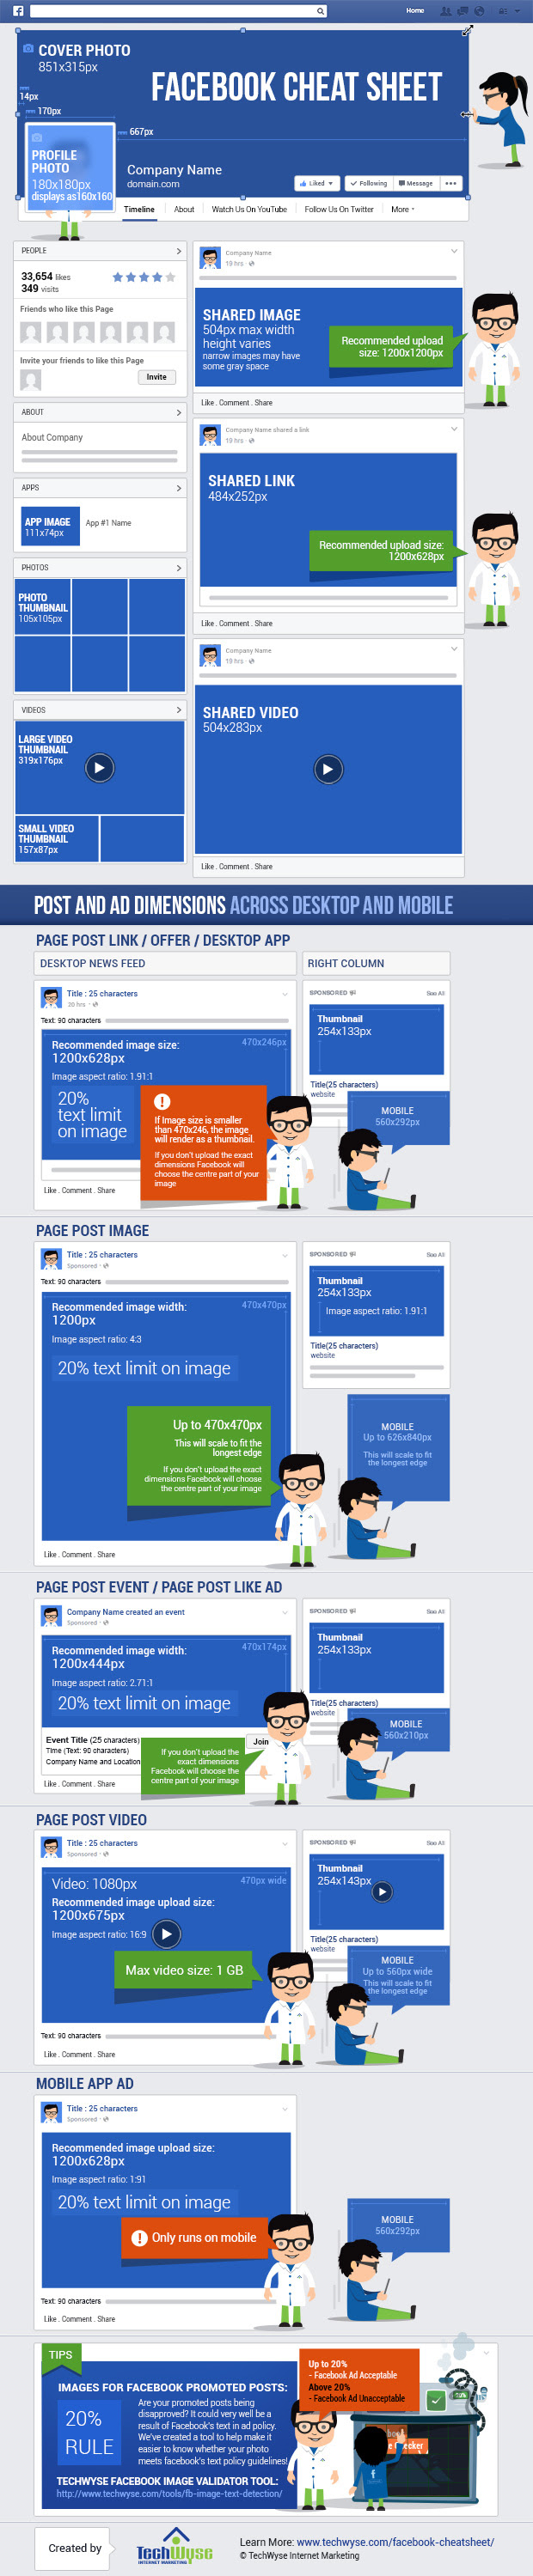 Facebook Cheat Sheet : Size and Dimensions